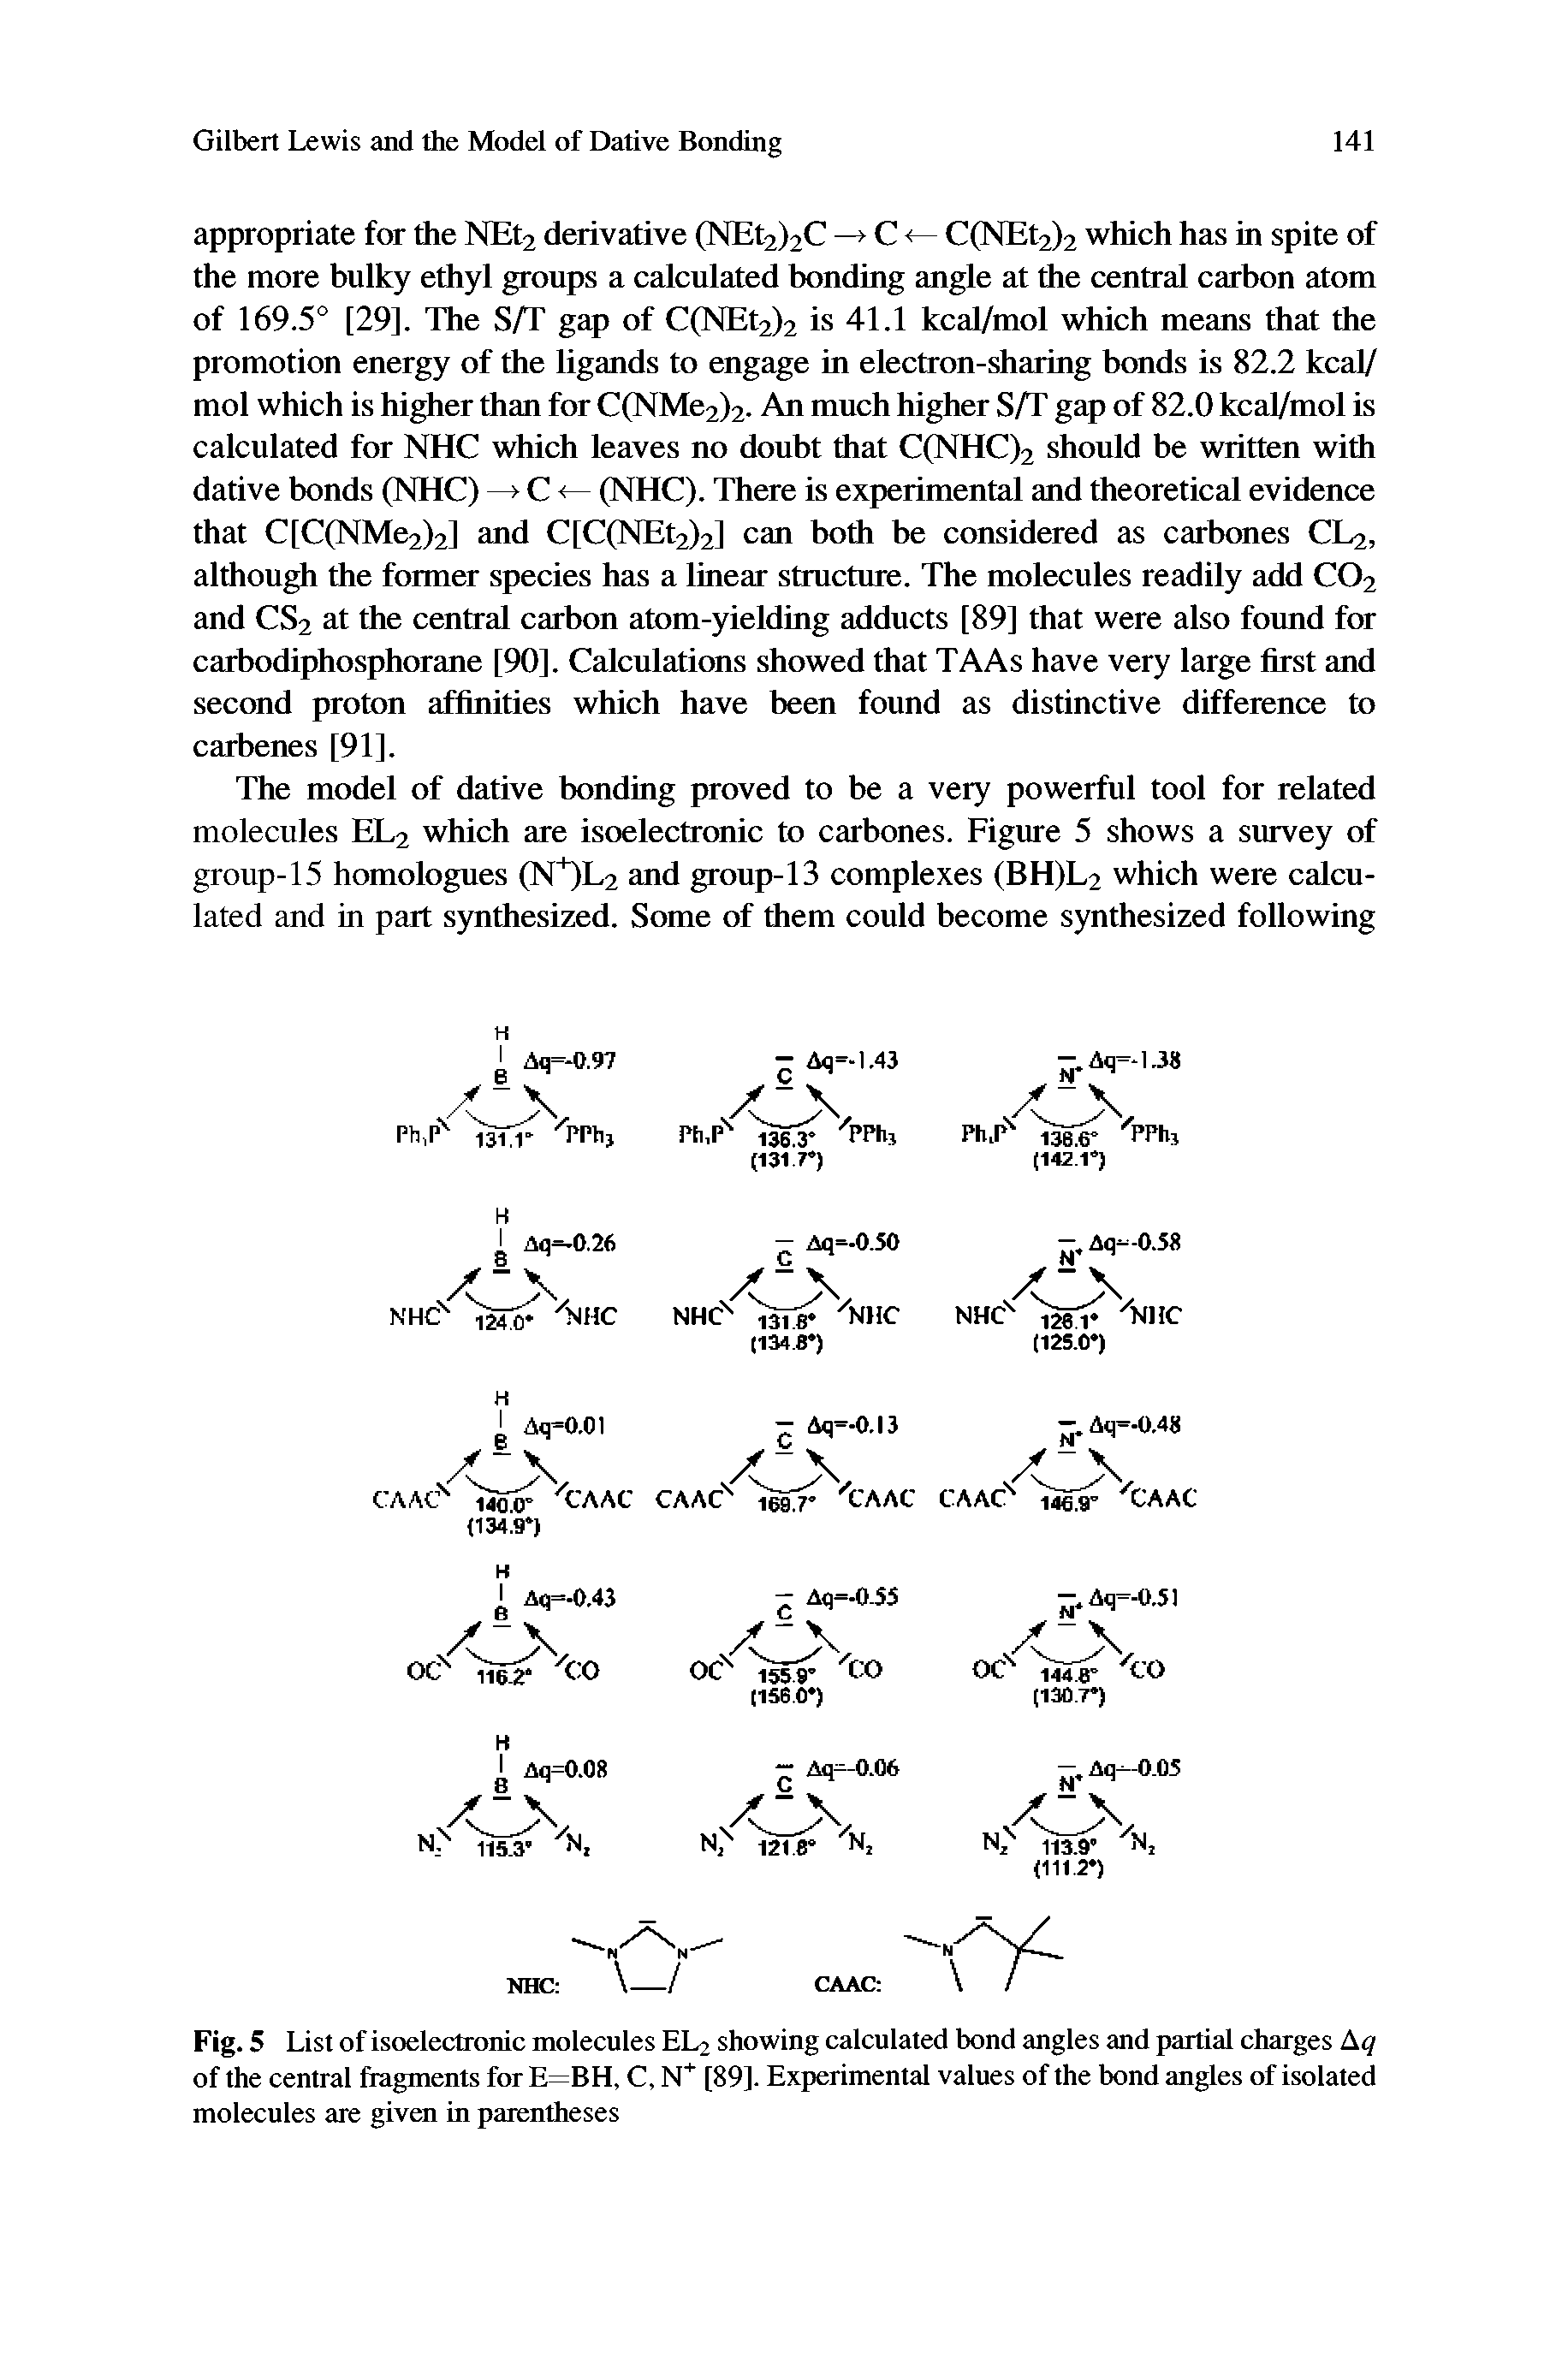 Fig. 5 List of isoelectronic molecules EL2 showing calculated bond angles and partial charges Aq of the central fragments for E=BH, C, N [89]. Experimental values of the bond angles of isolated molecules are given in parentheses...